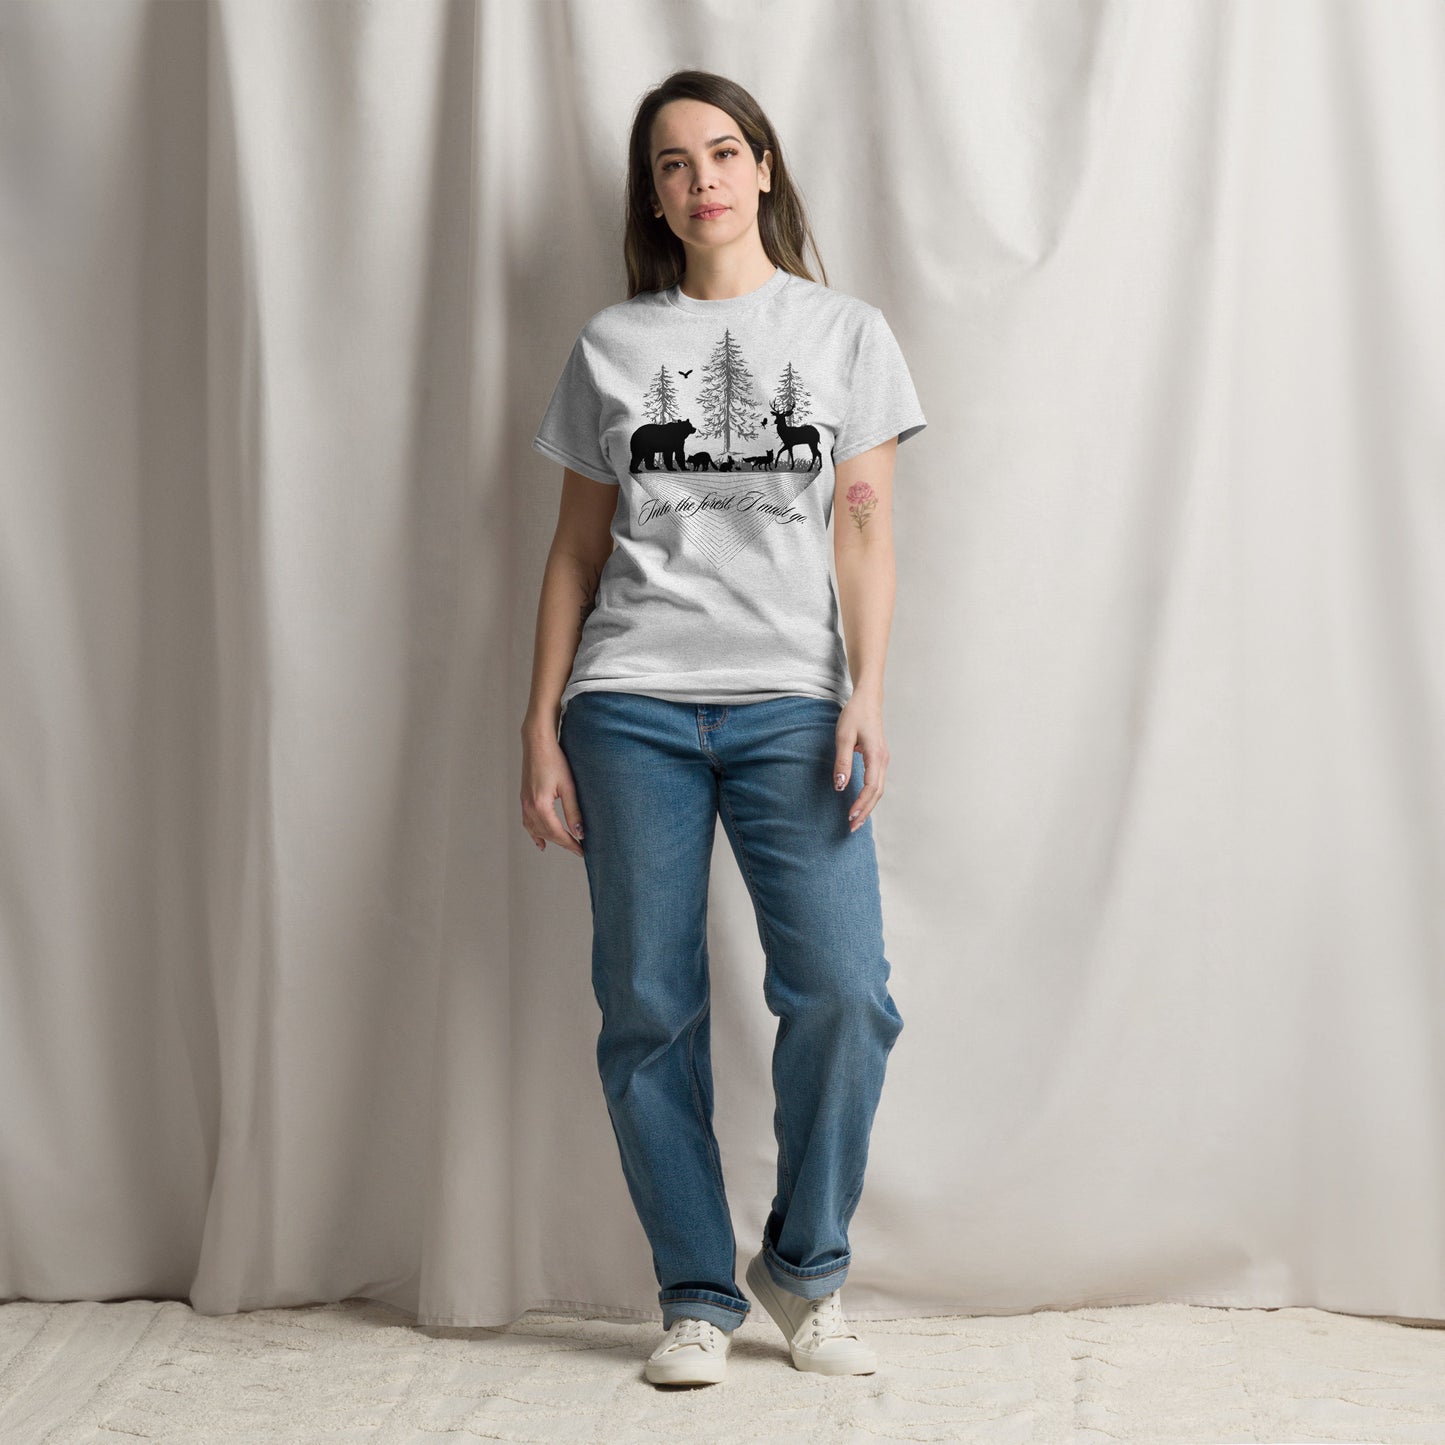 Unisex classic tee Into the forest